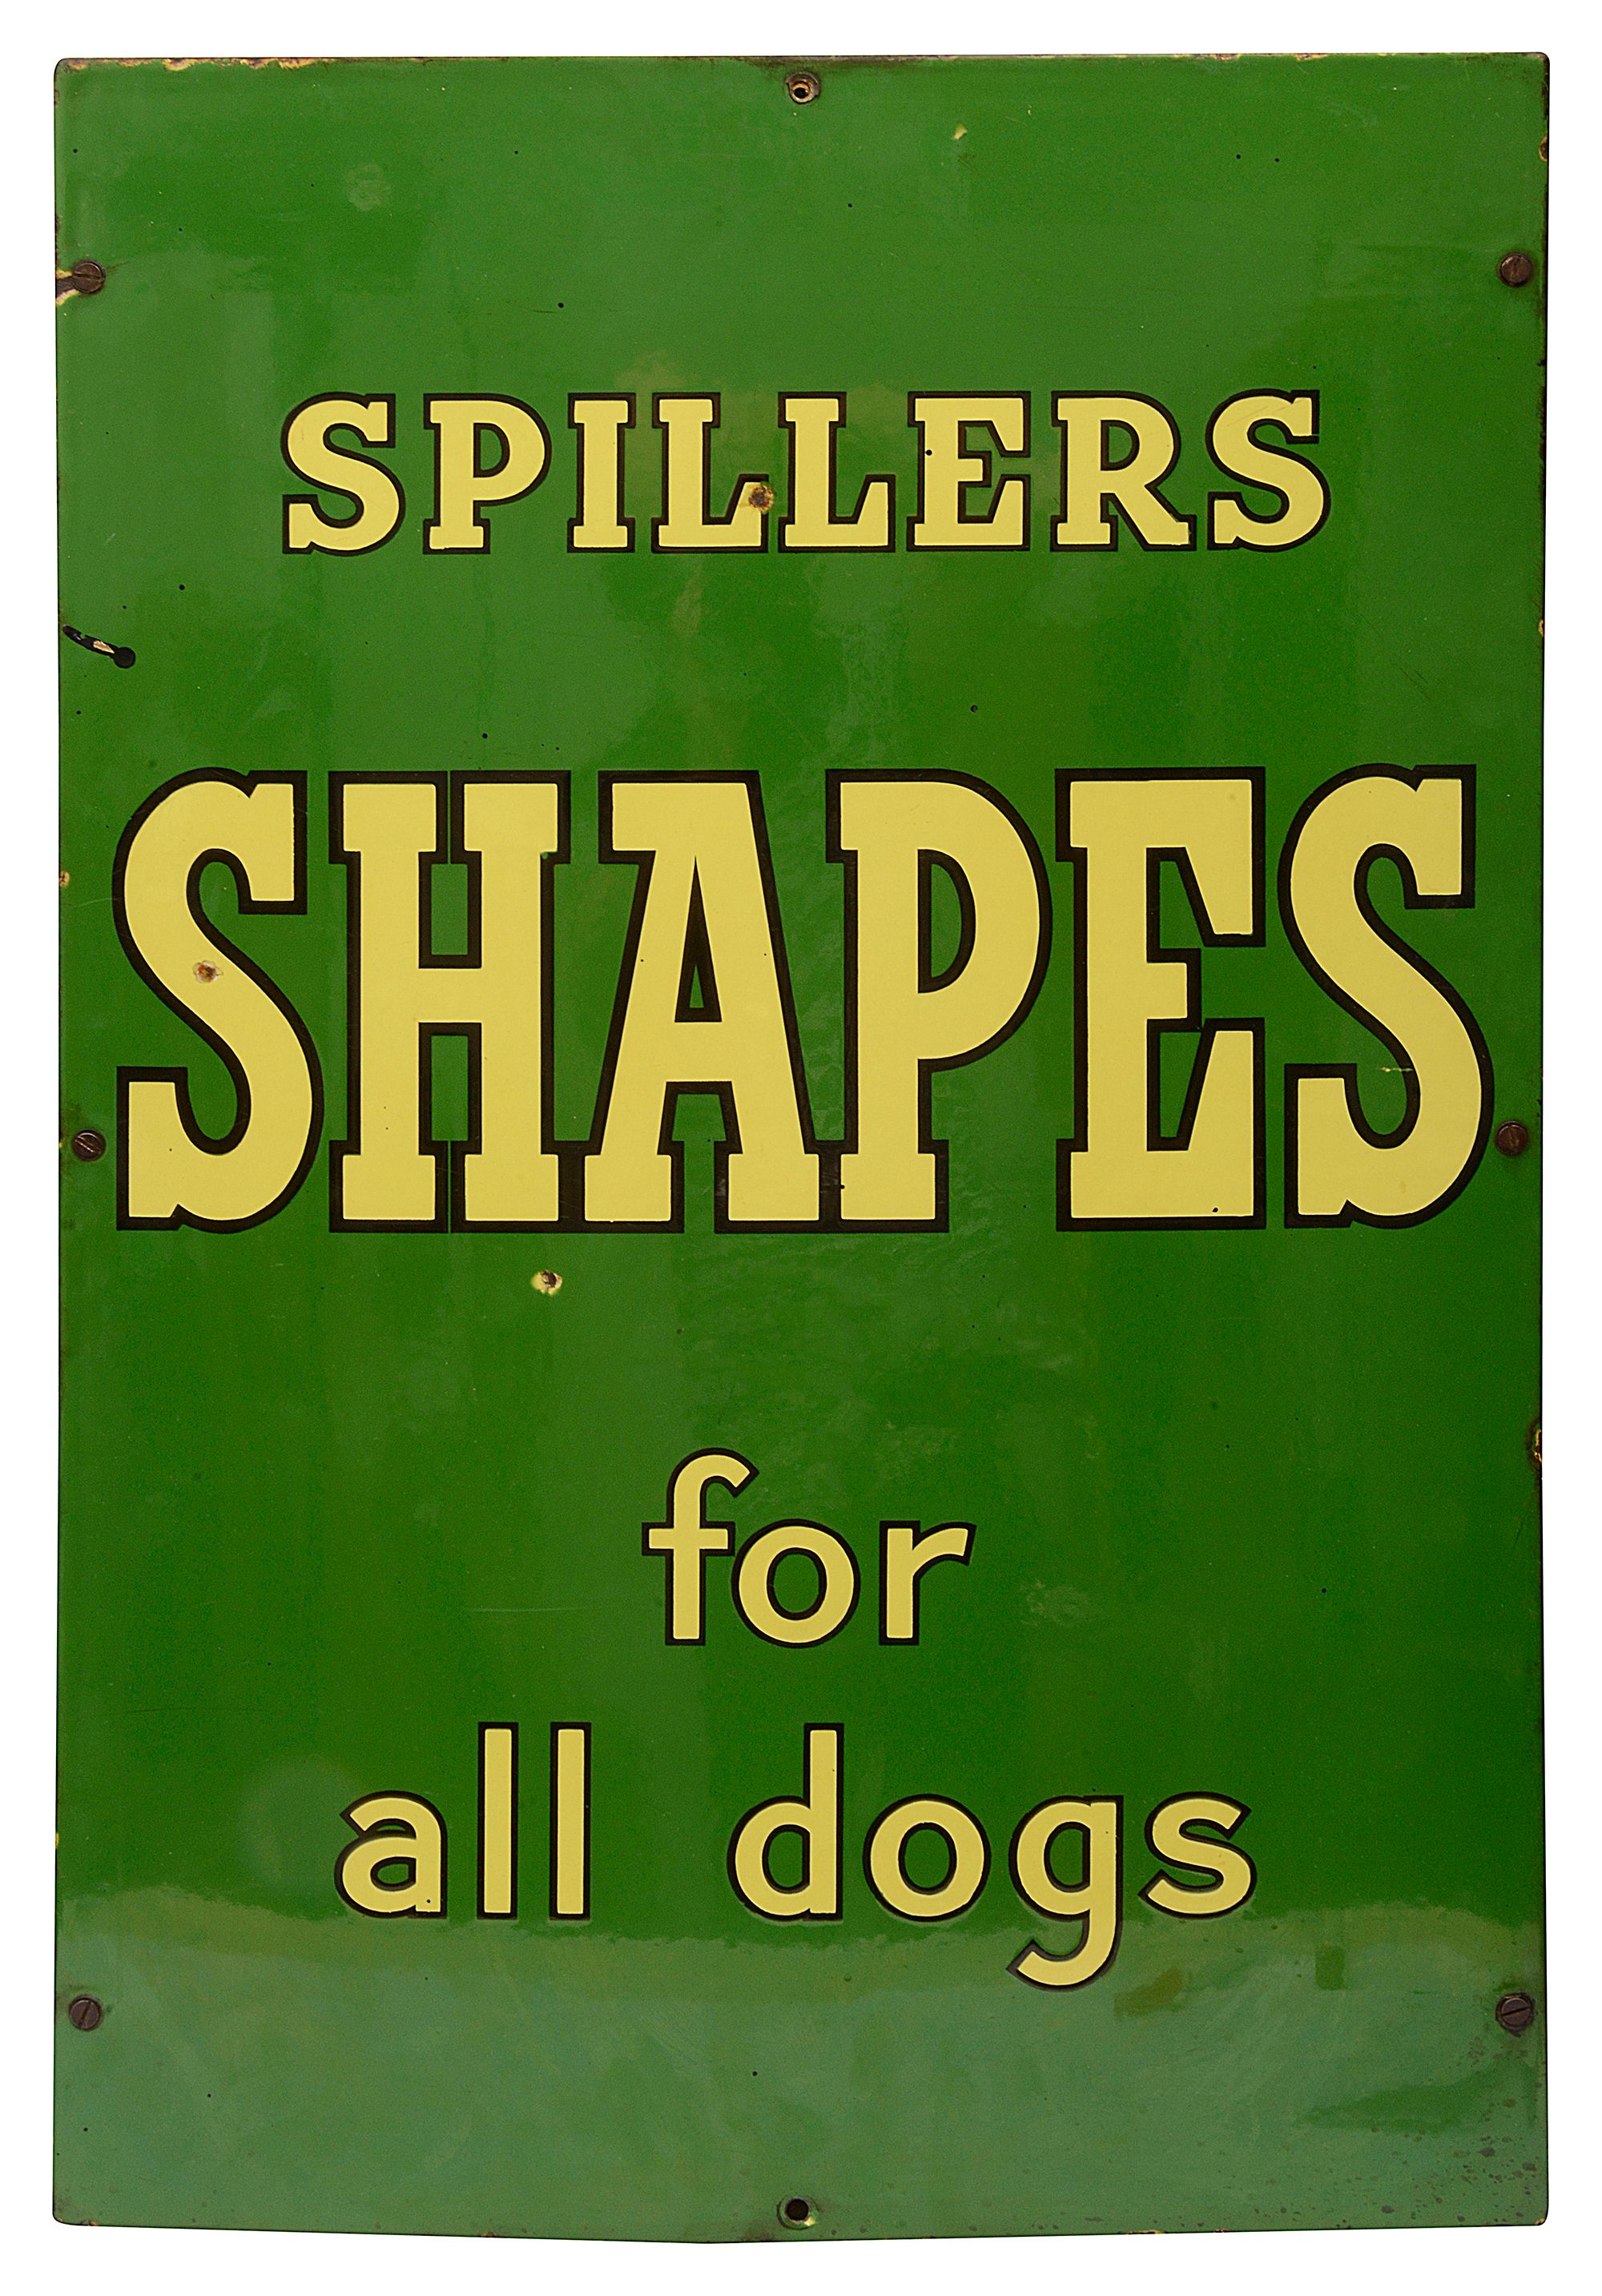 Advertising. A Spillers SHAPES for all dogs enamel sign